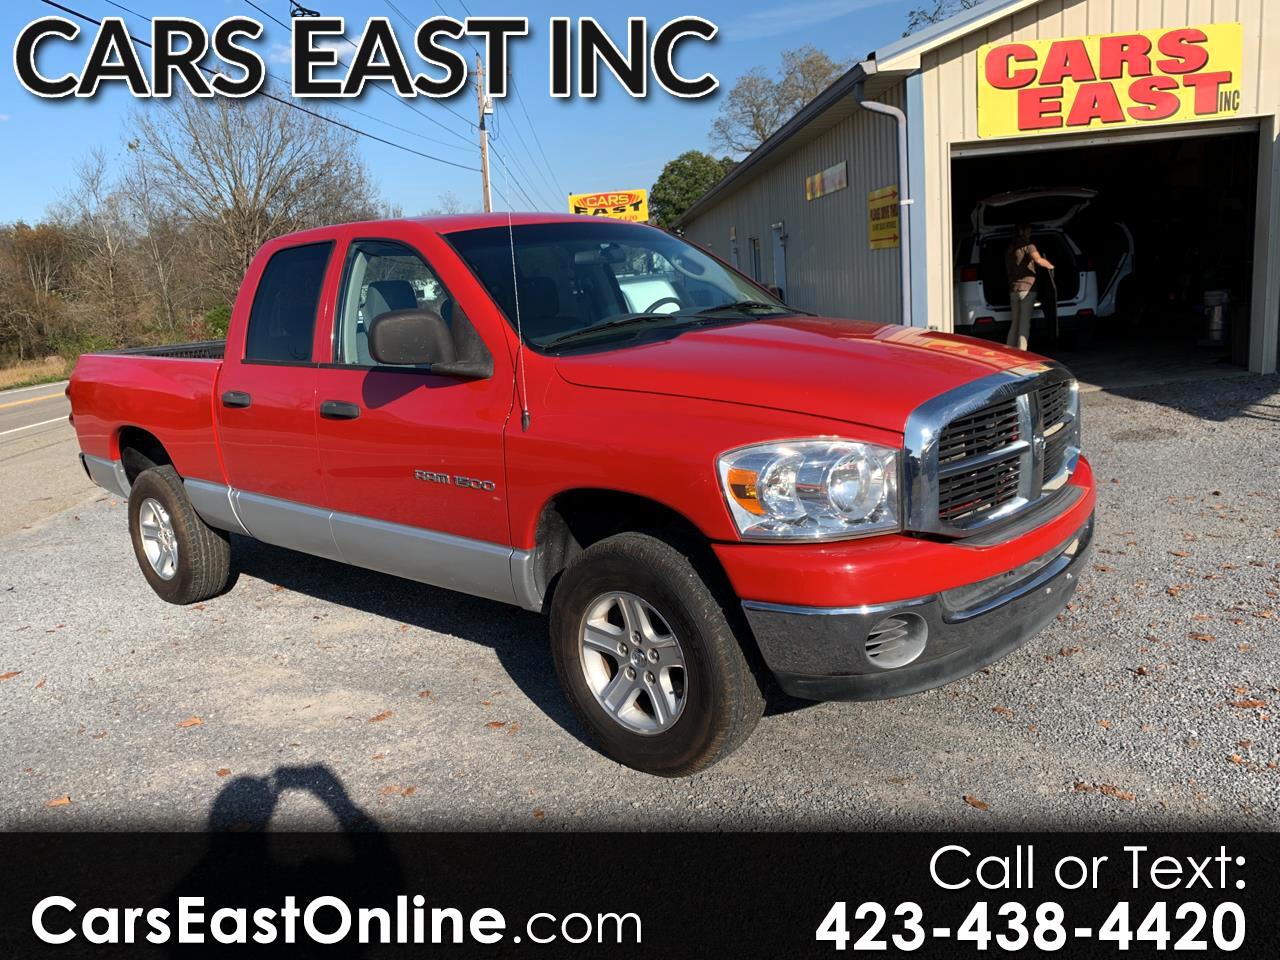 Used 2007 Dodge Ram 1500 4wd Quad Cab 140 5 Slt For Sale In